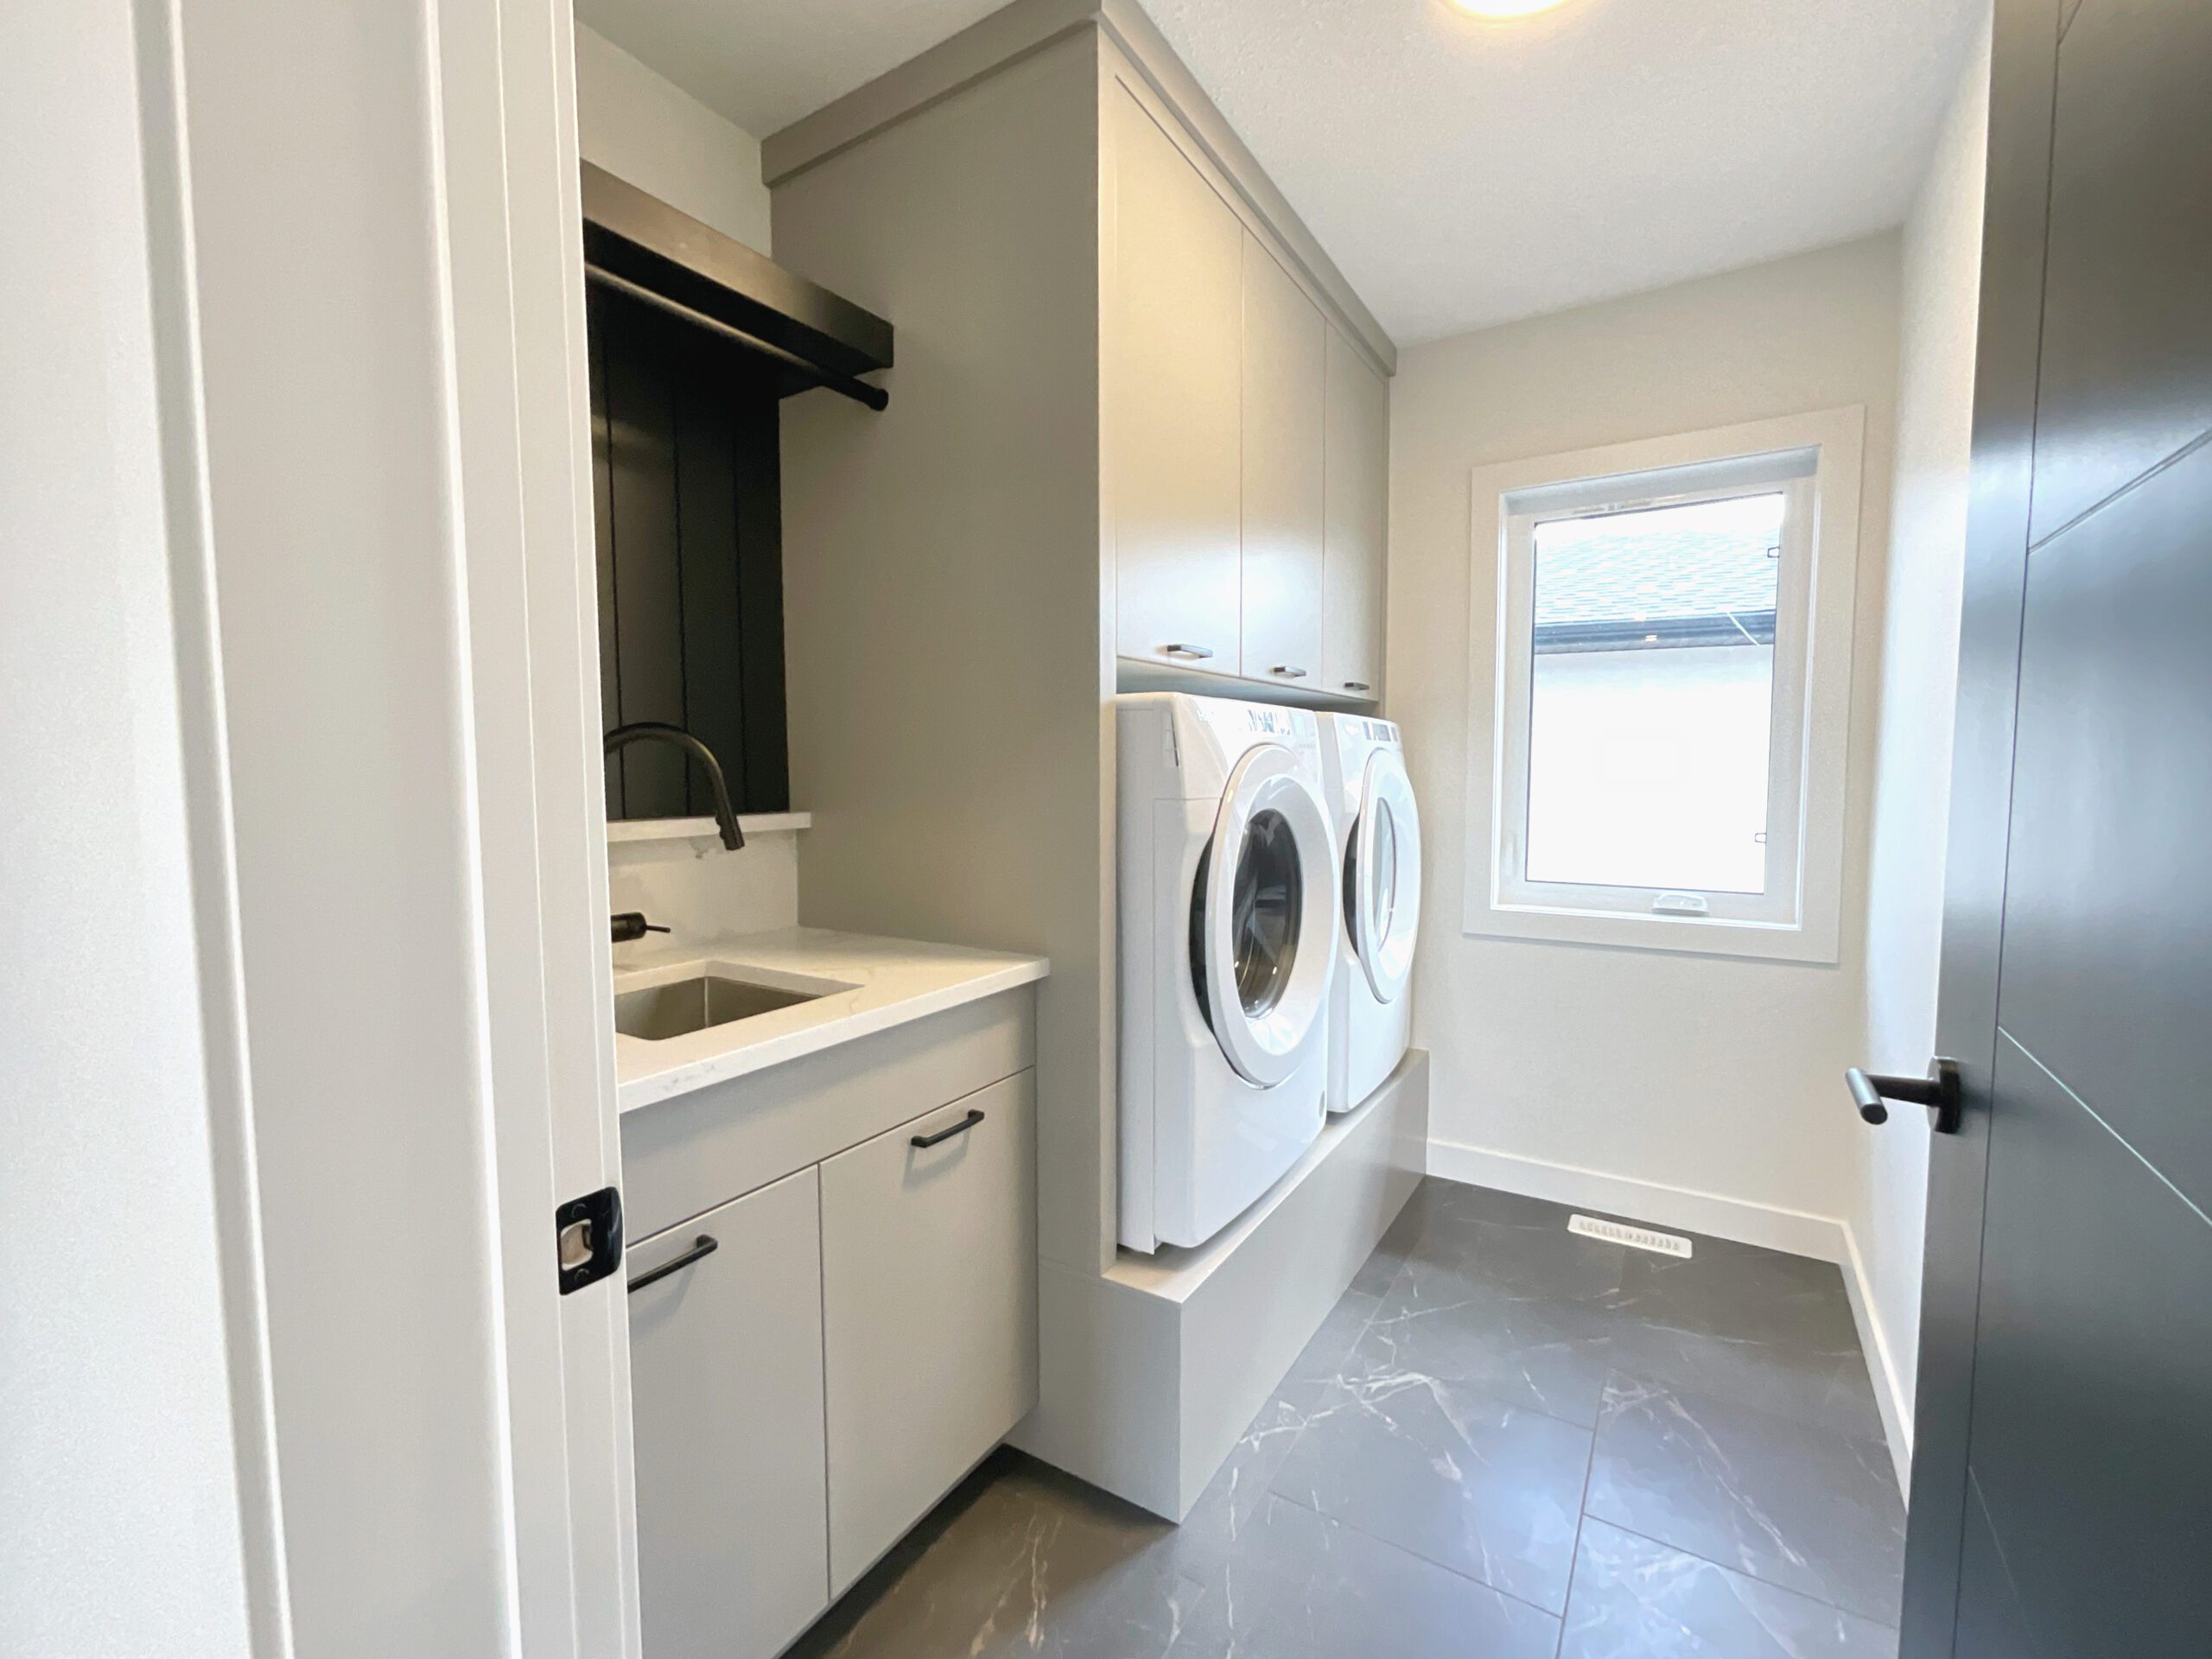 A laundry room with built-in pedestal cabinetry for the washer and dryer with a sink and closet rod and tiled flooring.